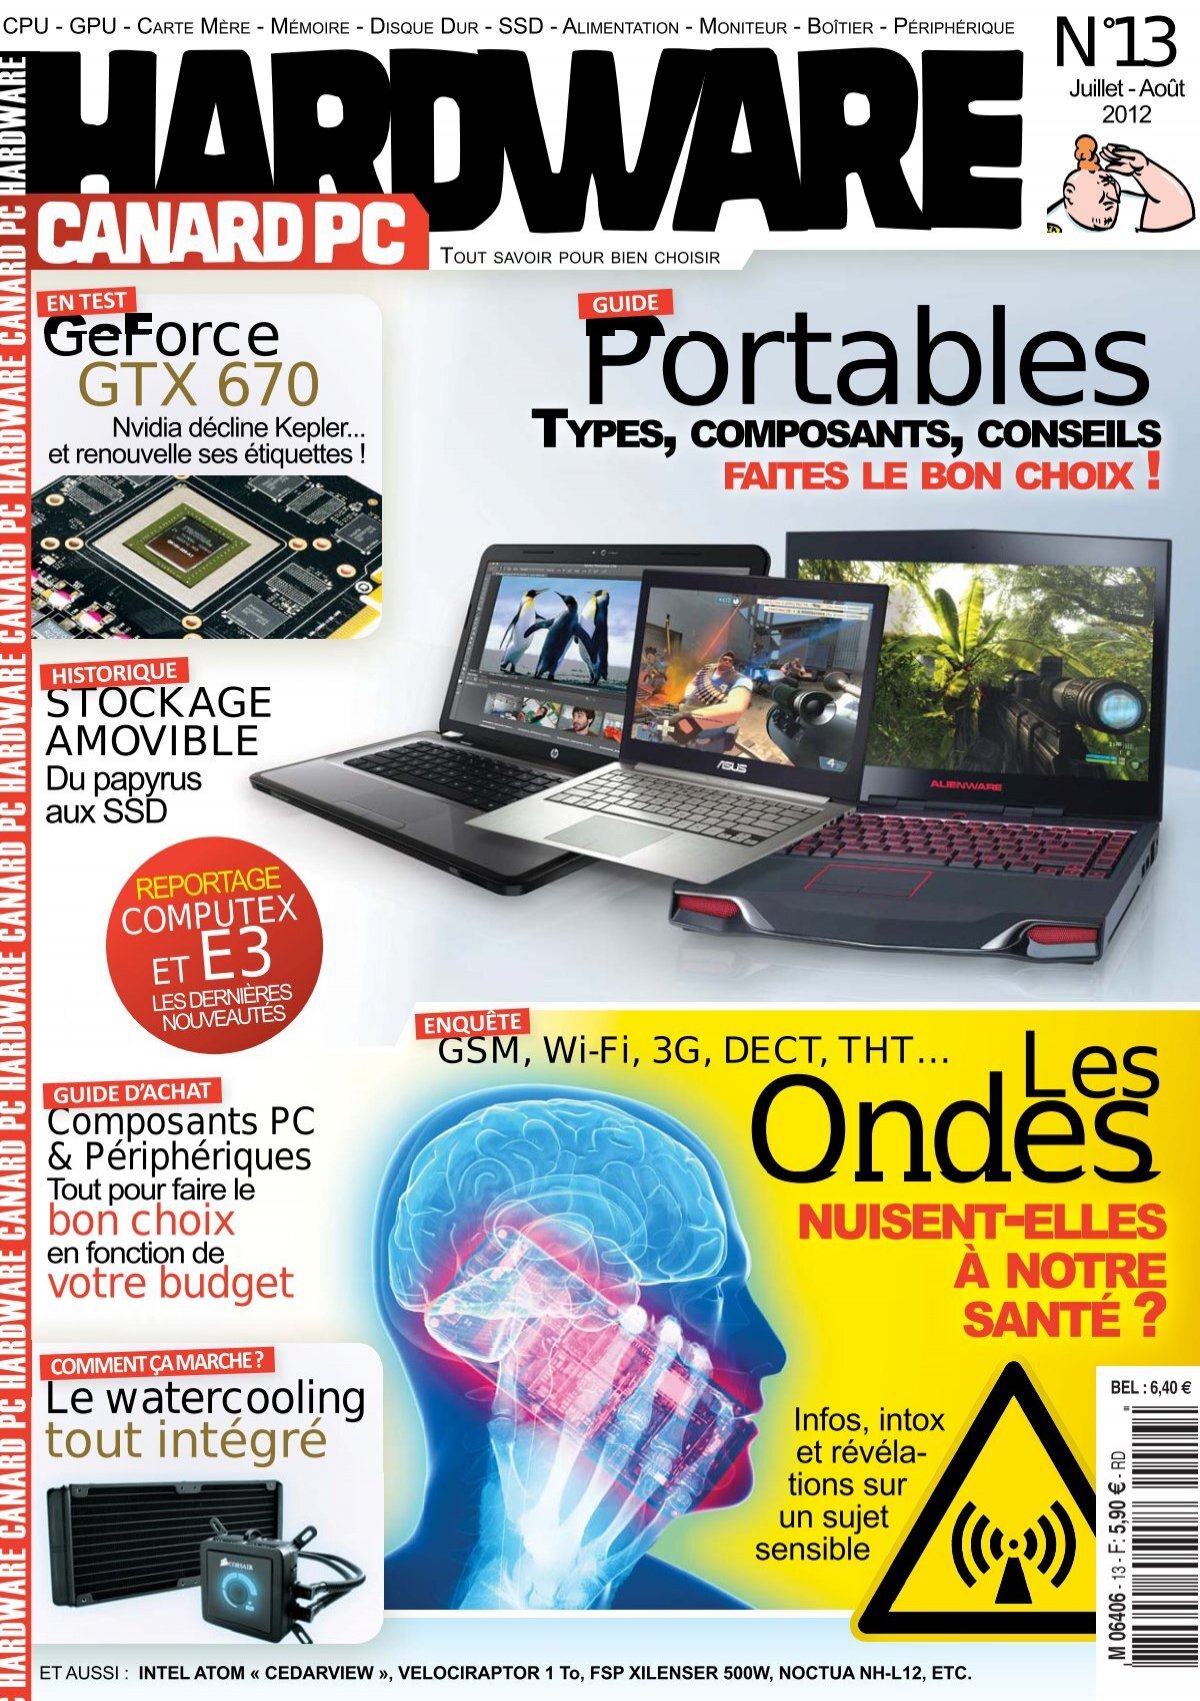 Alimentation PC 800 Watts : achat d'alimentation - Grosbill - Page 1